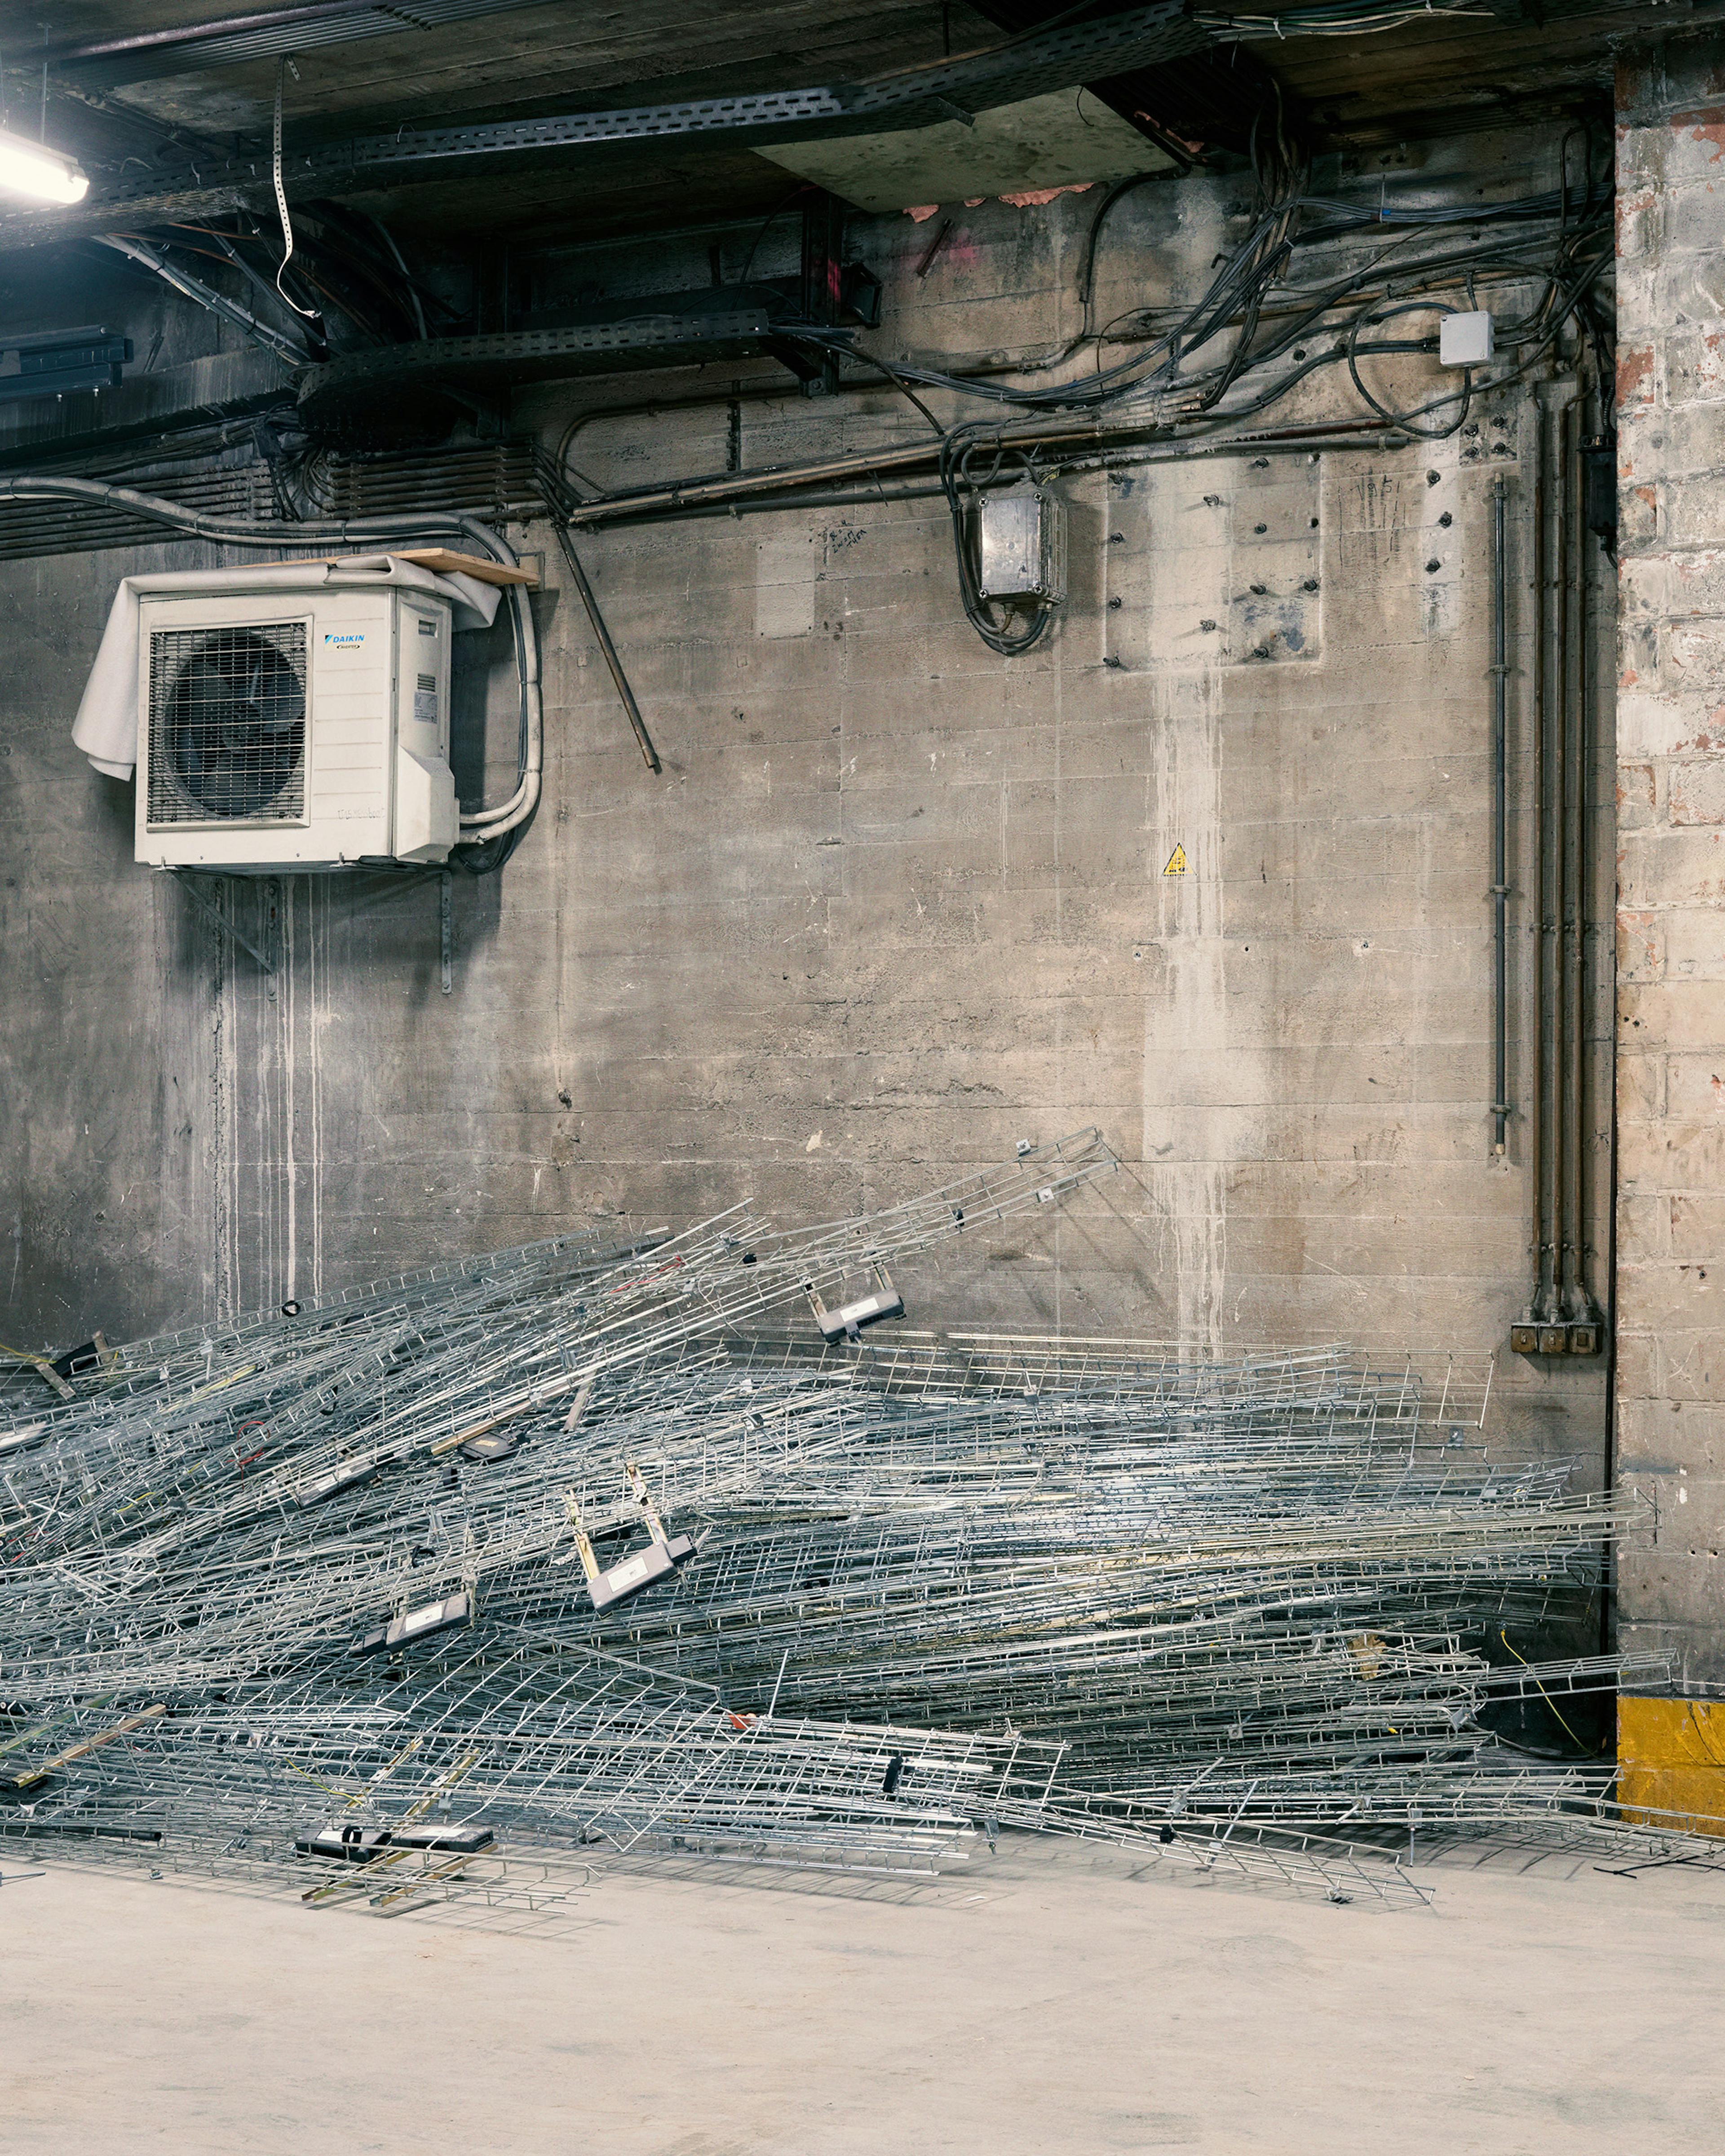 The cable trays were mined in the Monnaie building, Philippe Braquenier